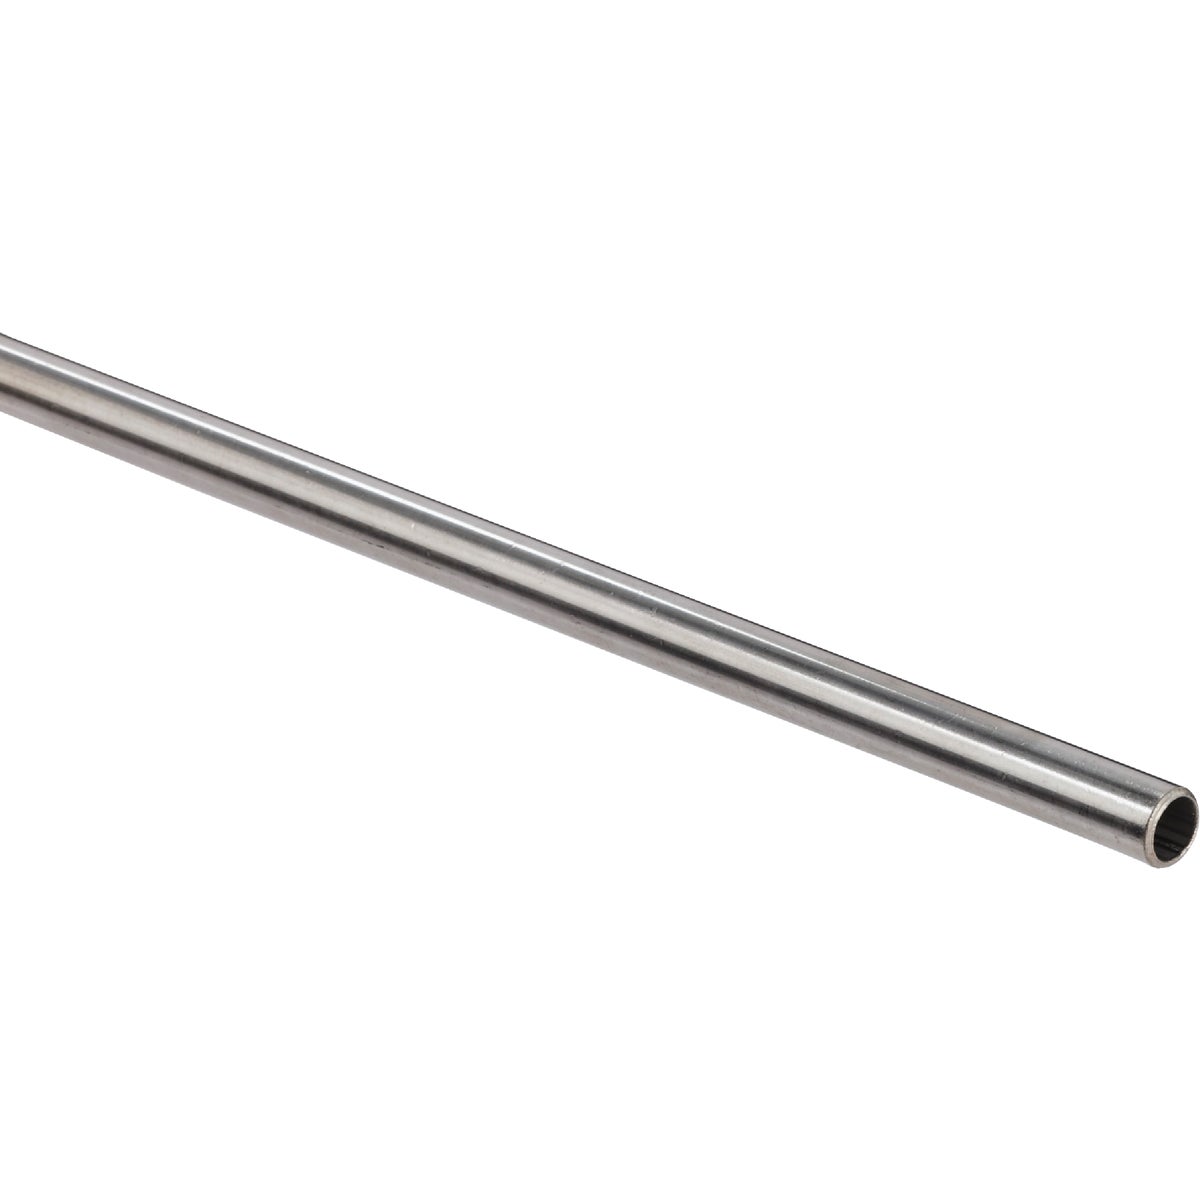 K&S Stainless Steel 1/4 In. O.D. x 1 Ft. Round Tube Stock